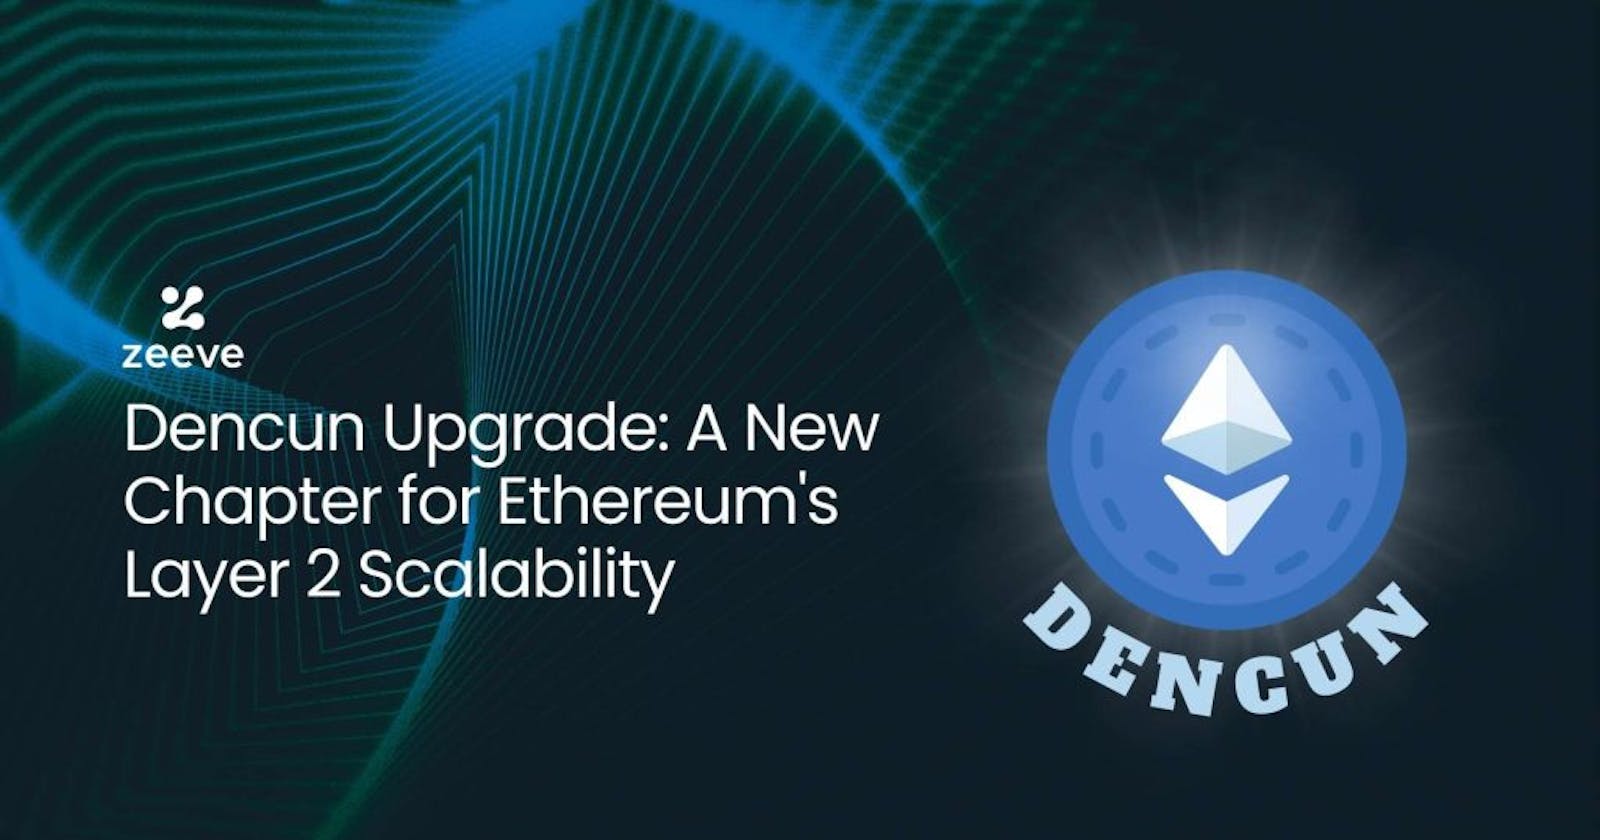 Dencun Upgrade: A New Chapter for Ethereum’s Layer 2 Scalability